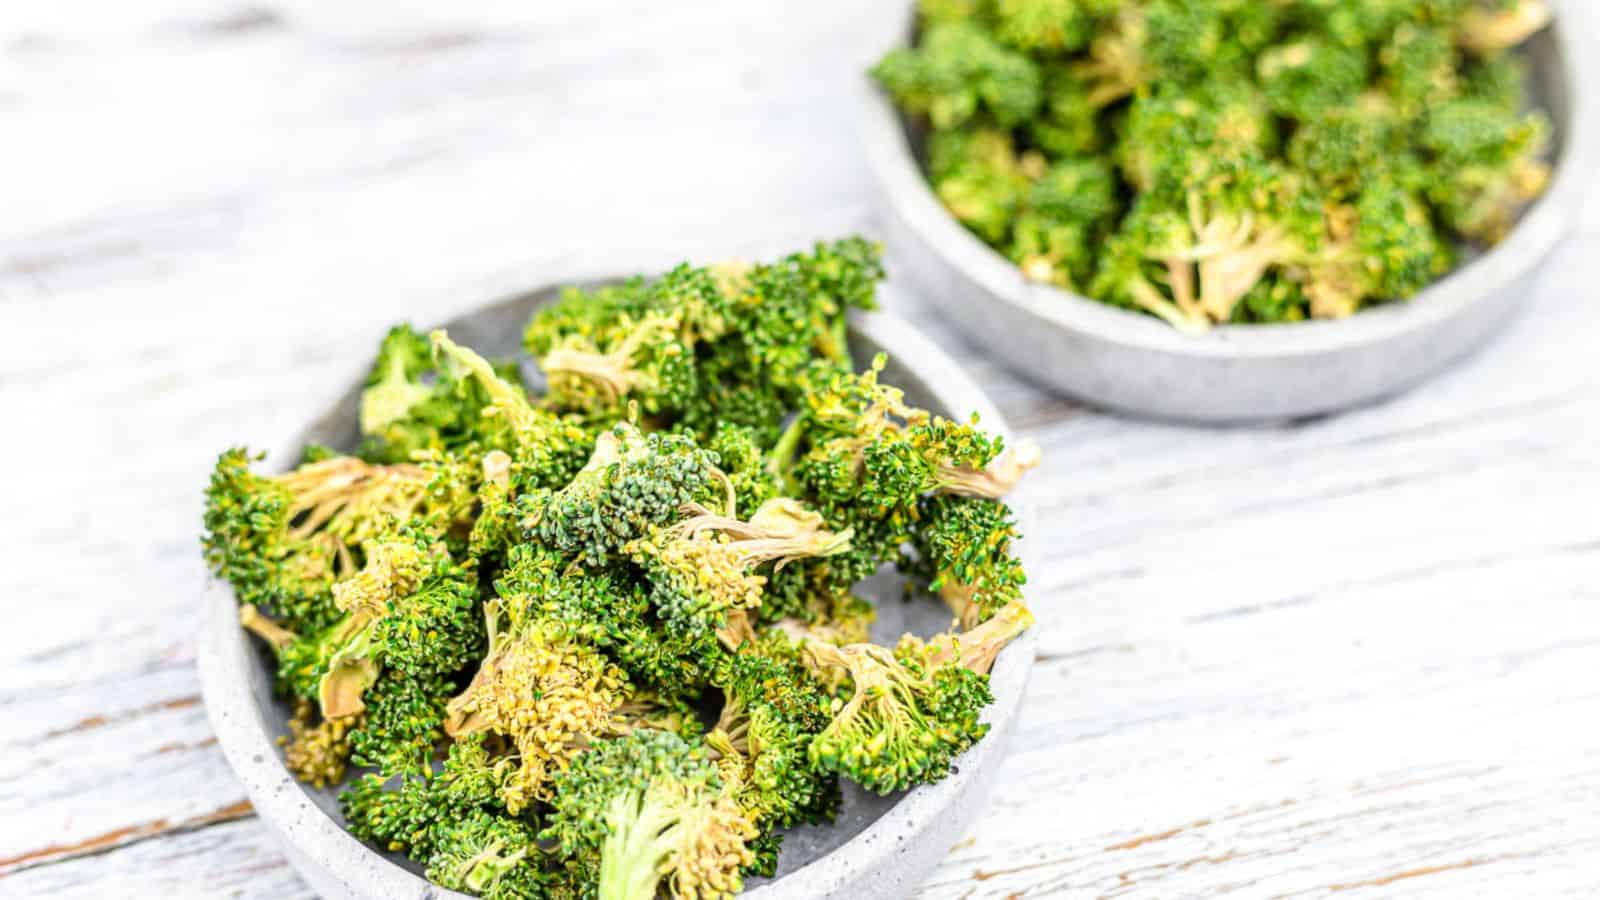 <p>Forget about boring veggies – Dehydrated Broccoli is here to redefine your snacking experience. These bite-sized broccoli pieces are dehydrated to perfection, offering a filling and guilt-free way to enjoy the goodness of greens. Dive into a crunchy twist on snacking that’s as simple as it is delicious. Say hello to broccoli in a whole new light!<br><strong>Get the Recipe: </strong><a href="https://www.lowcarb-nocarb.com/dehydrated-broccoli/?utm_source=msn&utm_medium=page&utm_campaign=msn">Dehydrated Broccoli</a></p>